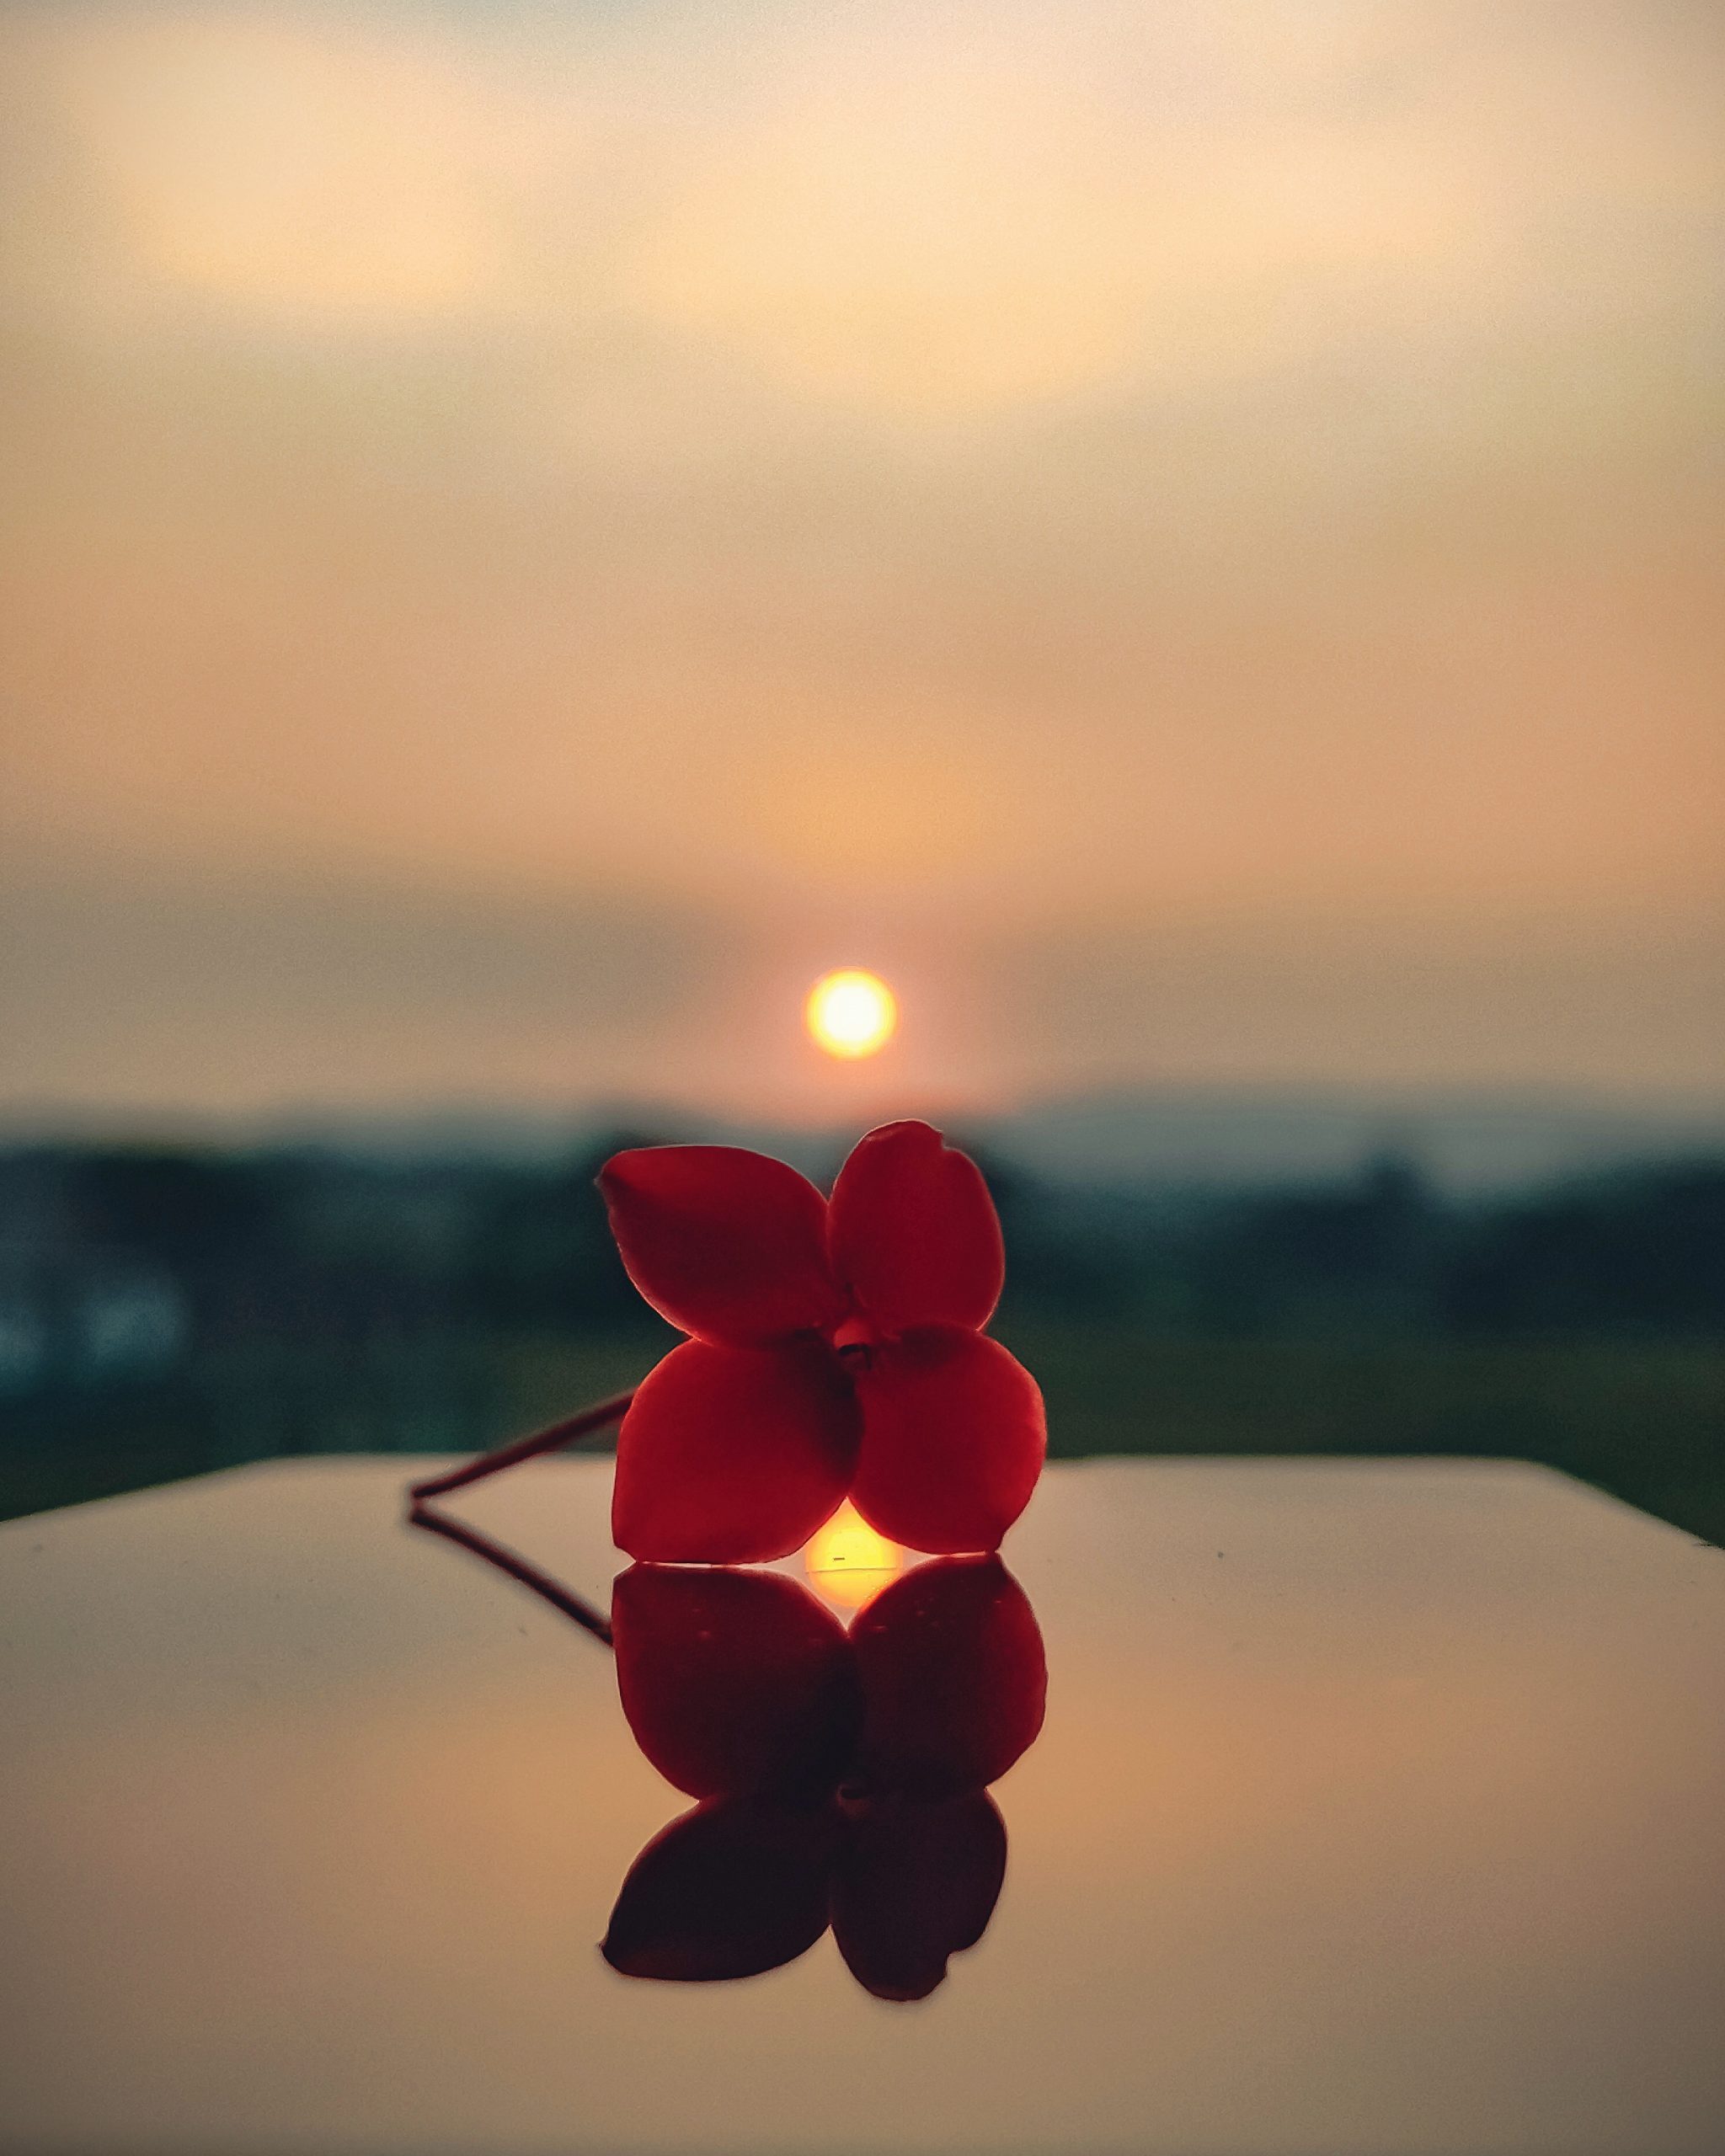 A flower with reflection and sunset